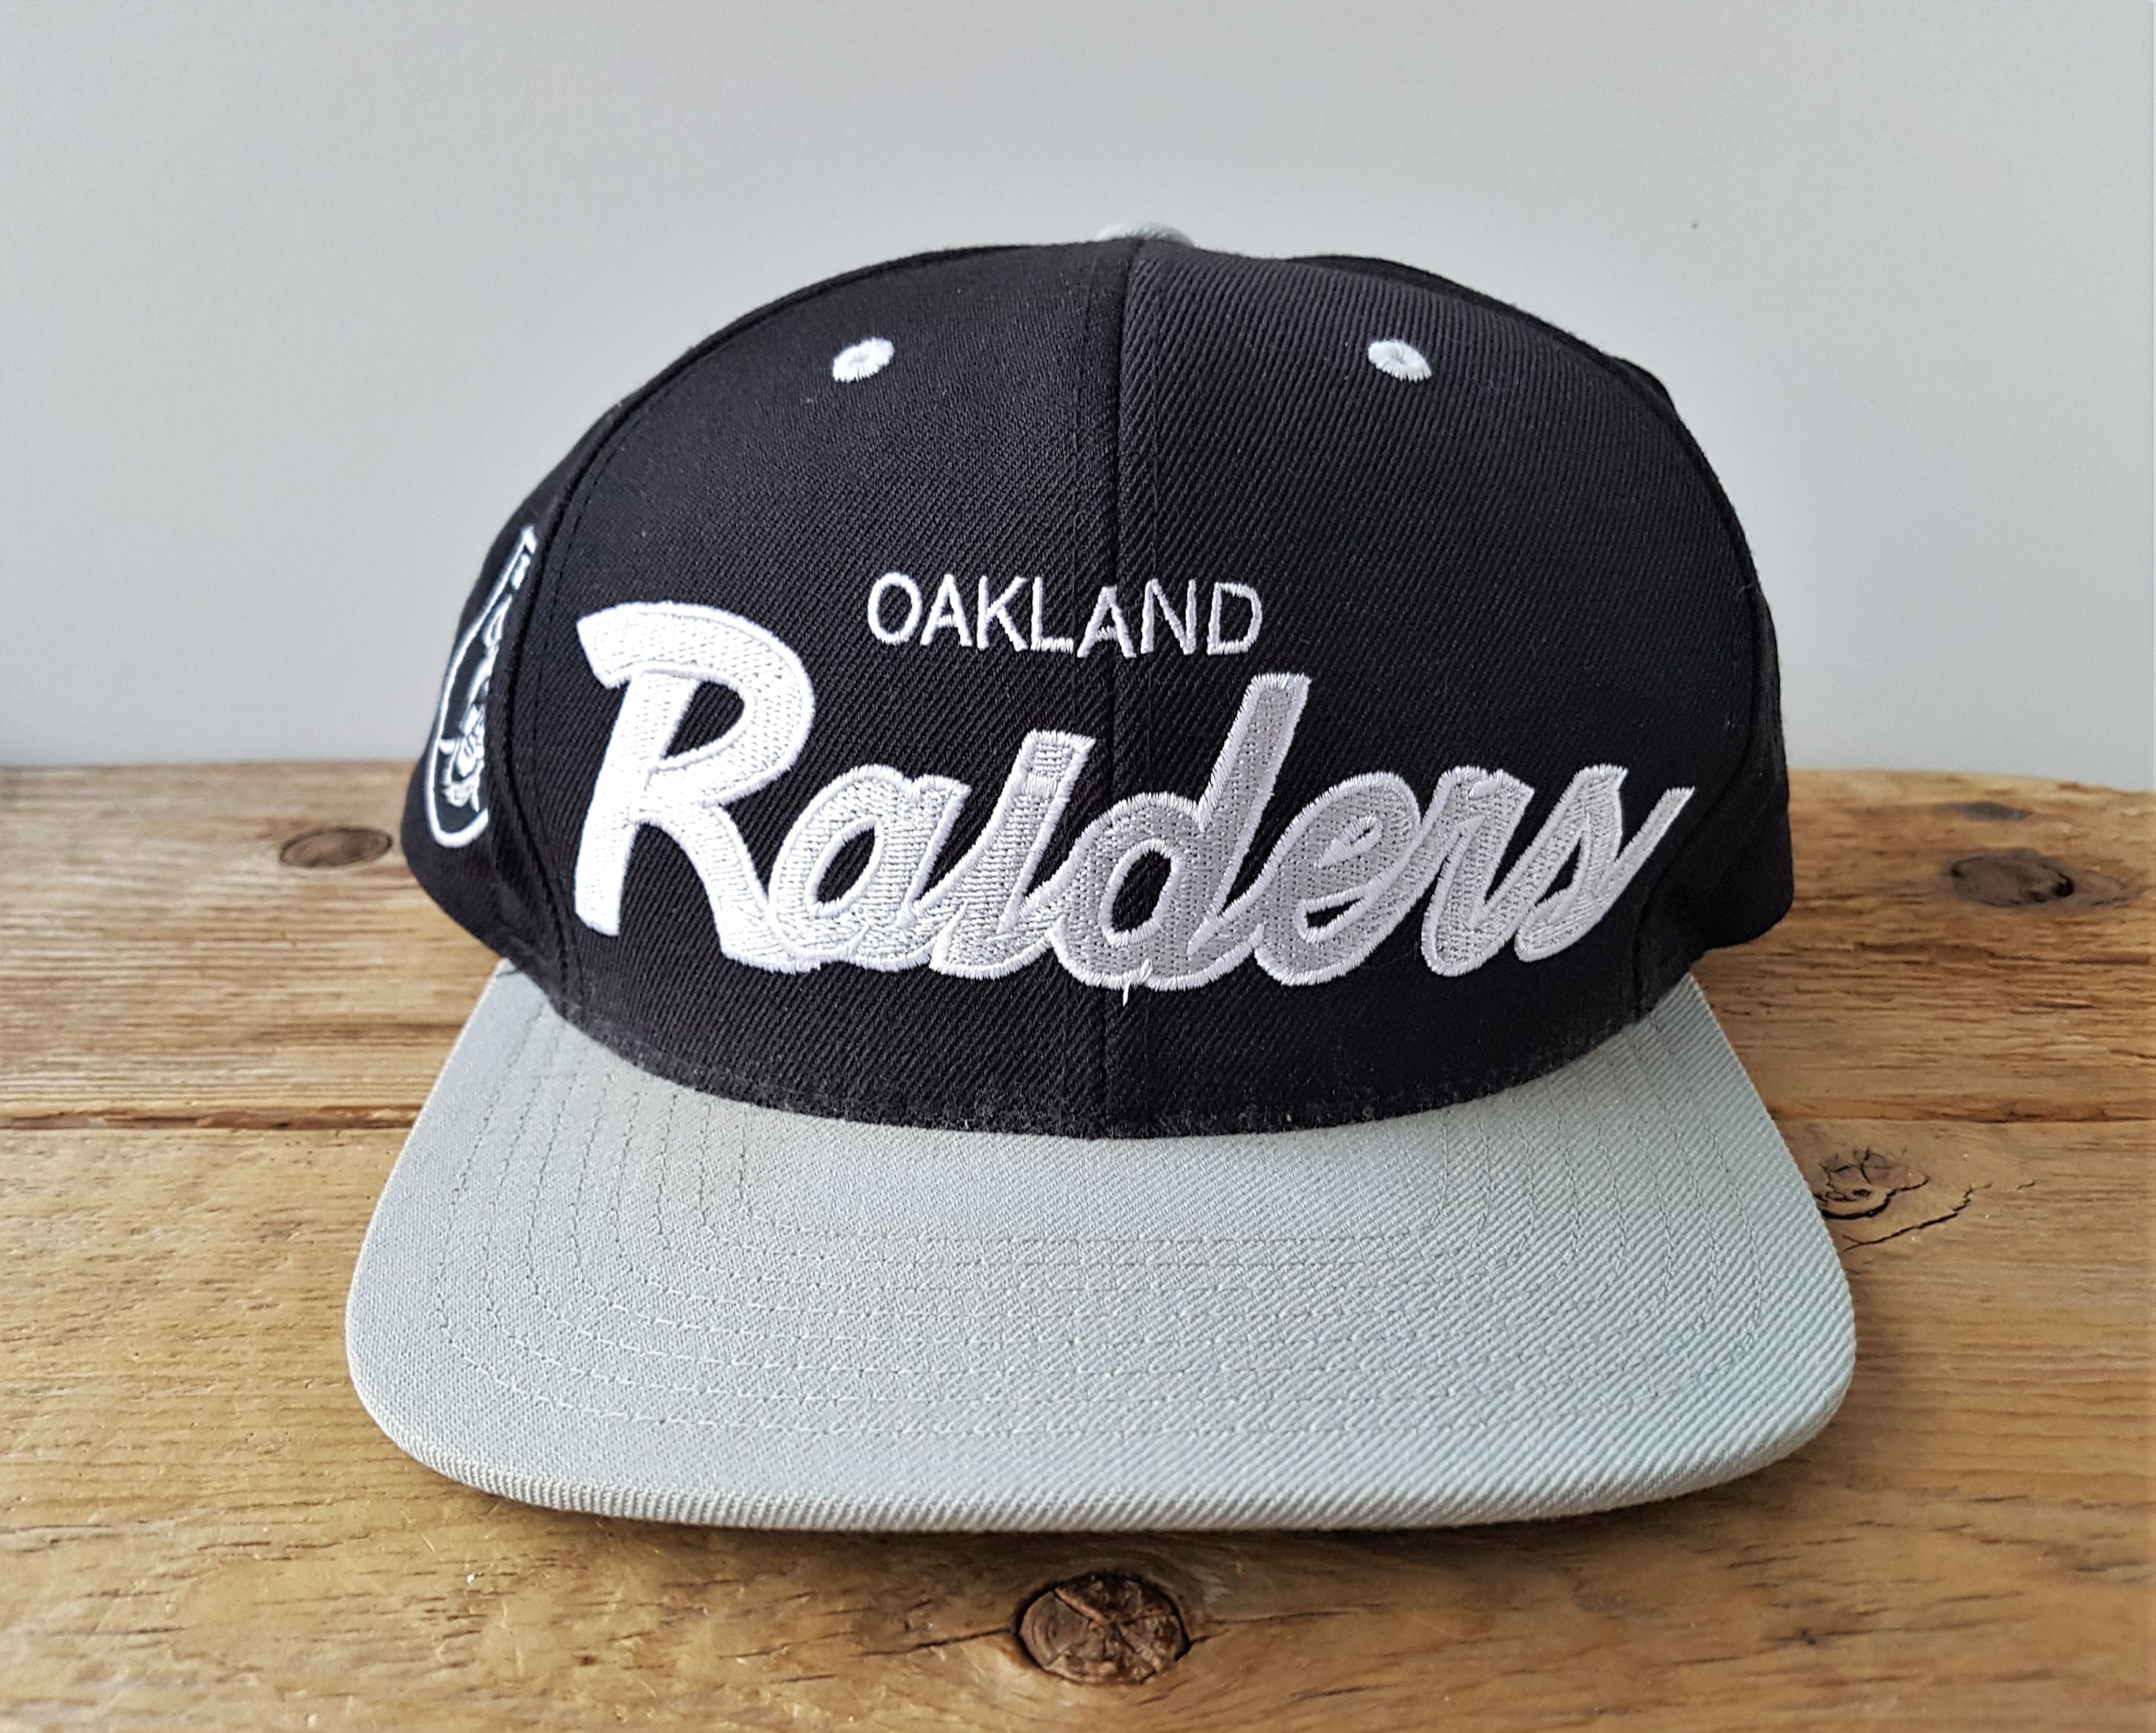 Oakland RAIDERS Mitchell & Ness SCRIPT Snapback Hat Vintage Collection  Official Licensed NFL Nostalgia Football Cap 2 Tone Deadstock